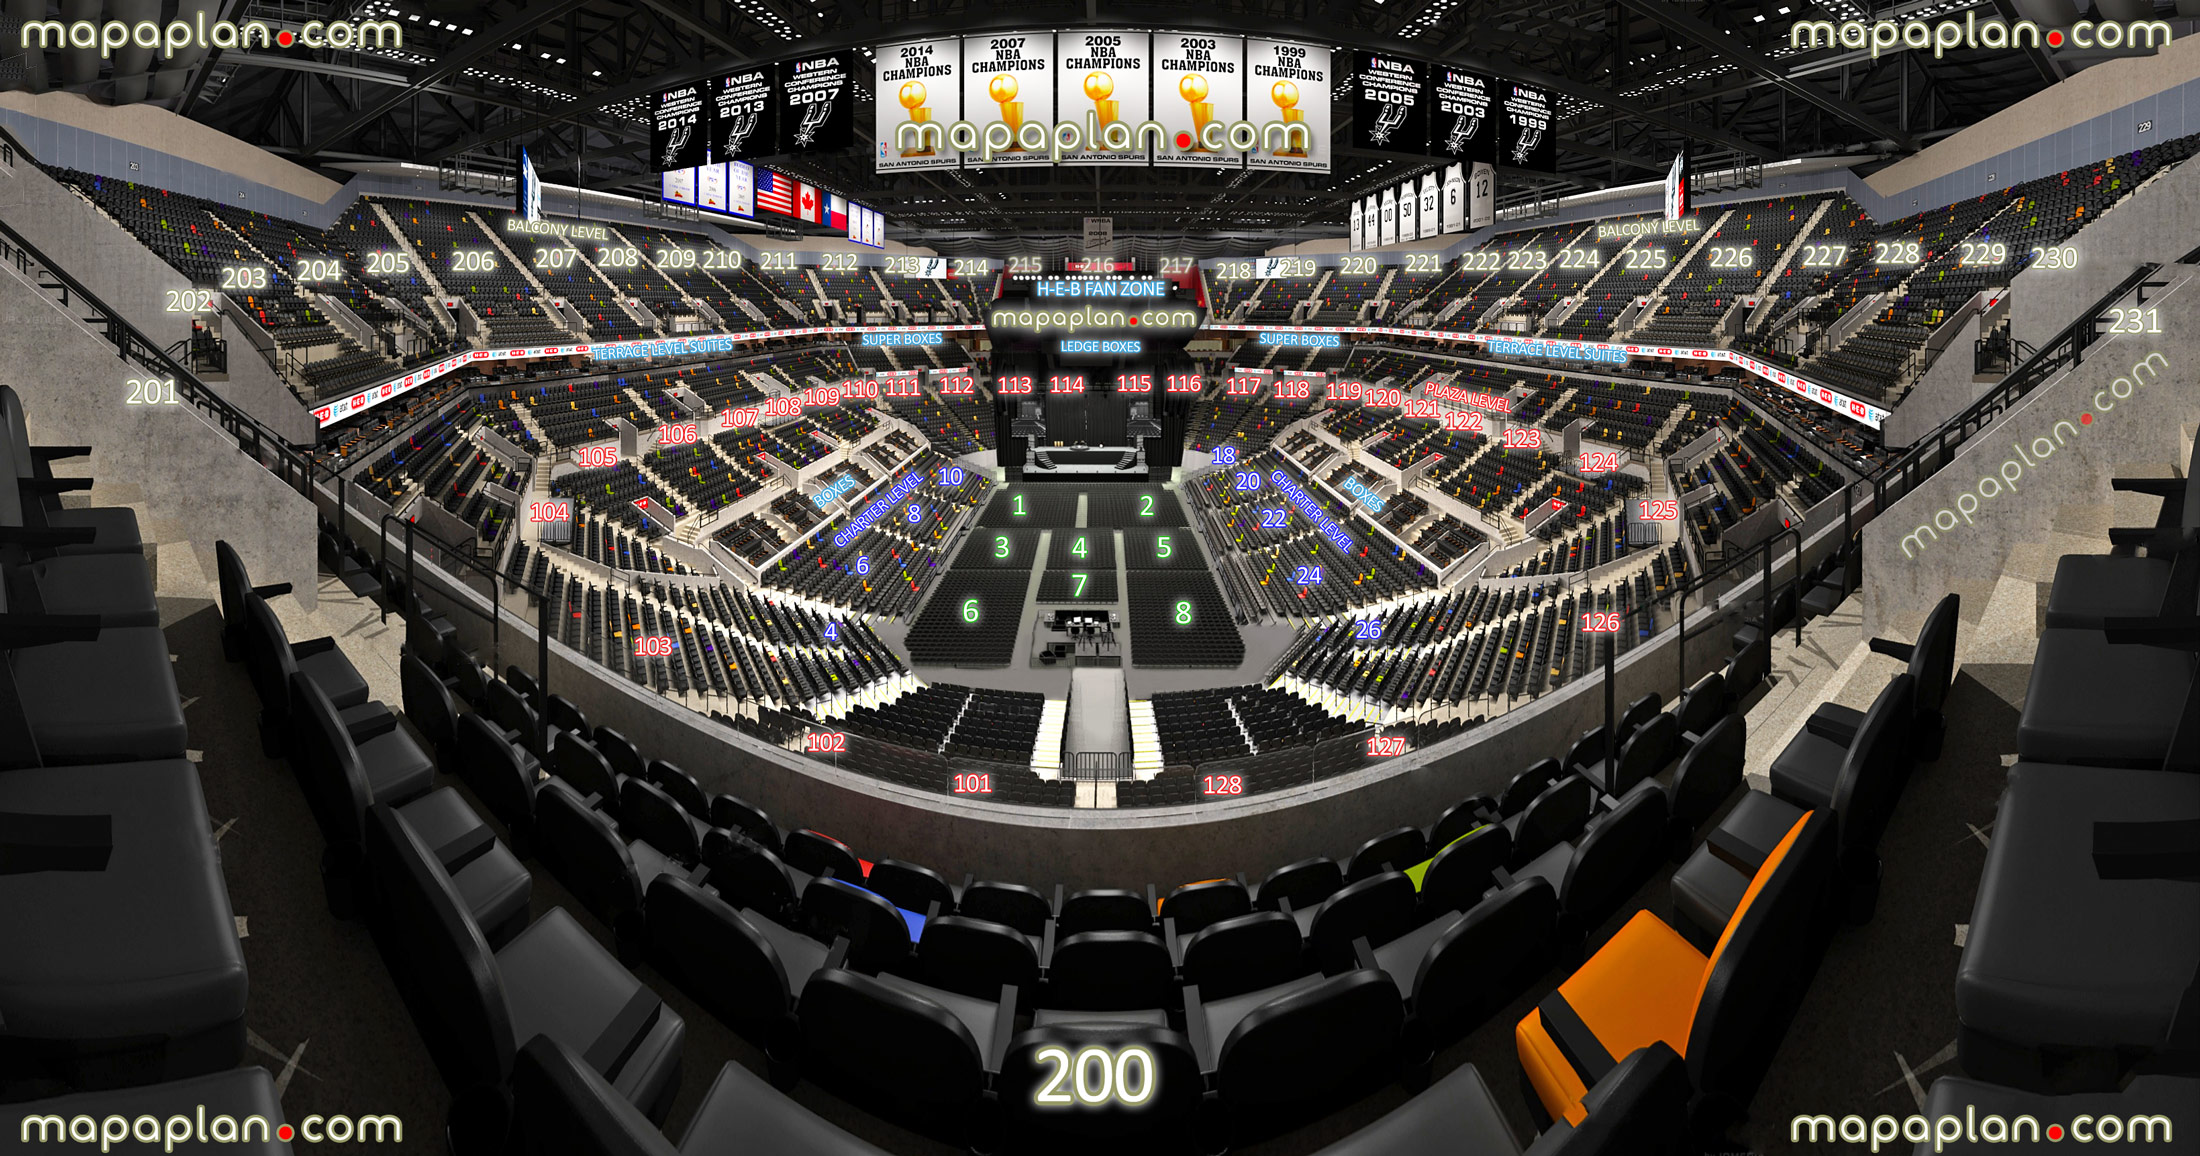 view section 200 row 5 seat 8 virtual venue 3d interactive inside stage review tour concert interior picture charter plaza terrace balcony levels suites floor 1 2 3 4 5 6 7 8 San Antonio Frost Bank Center seating chart